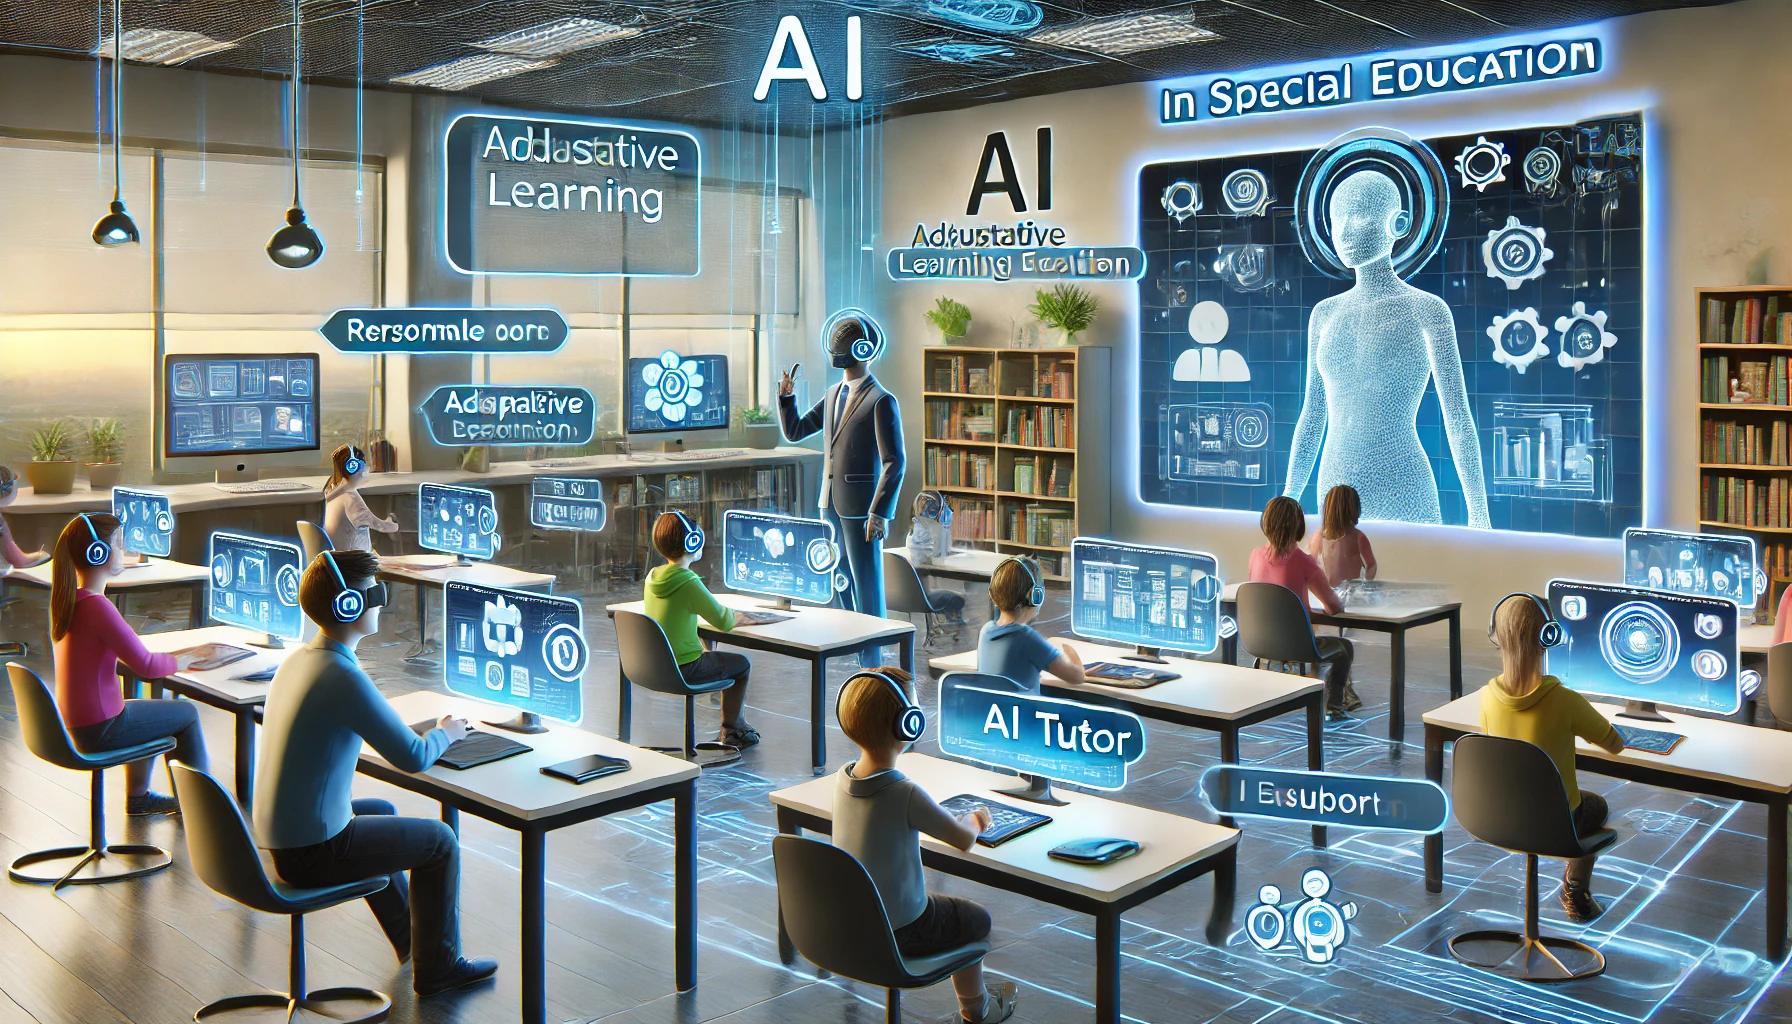 The Future of Learning: AI and Special Education